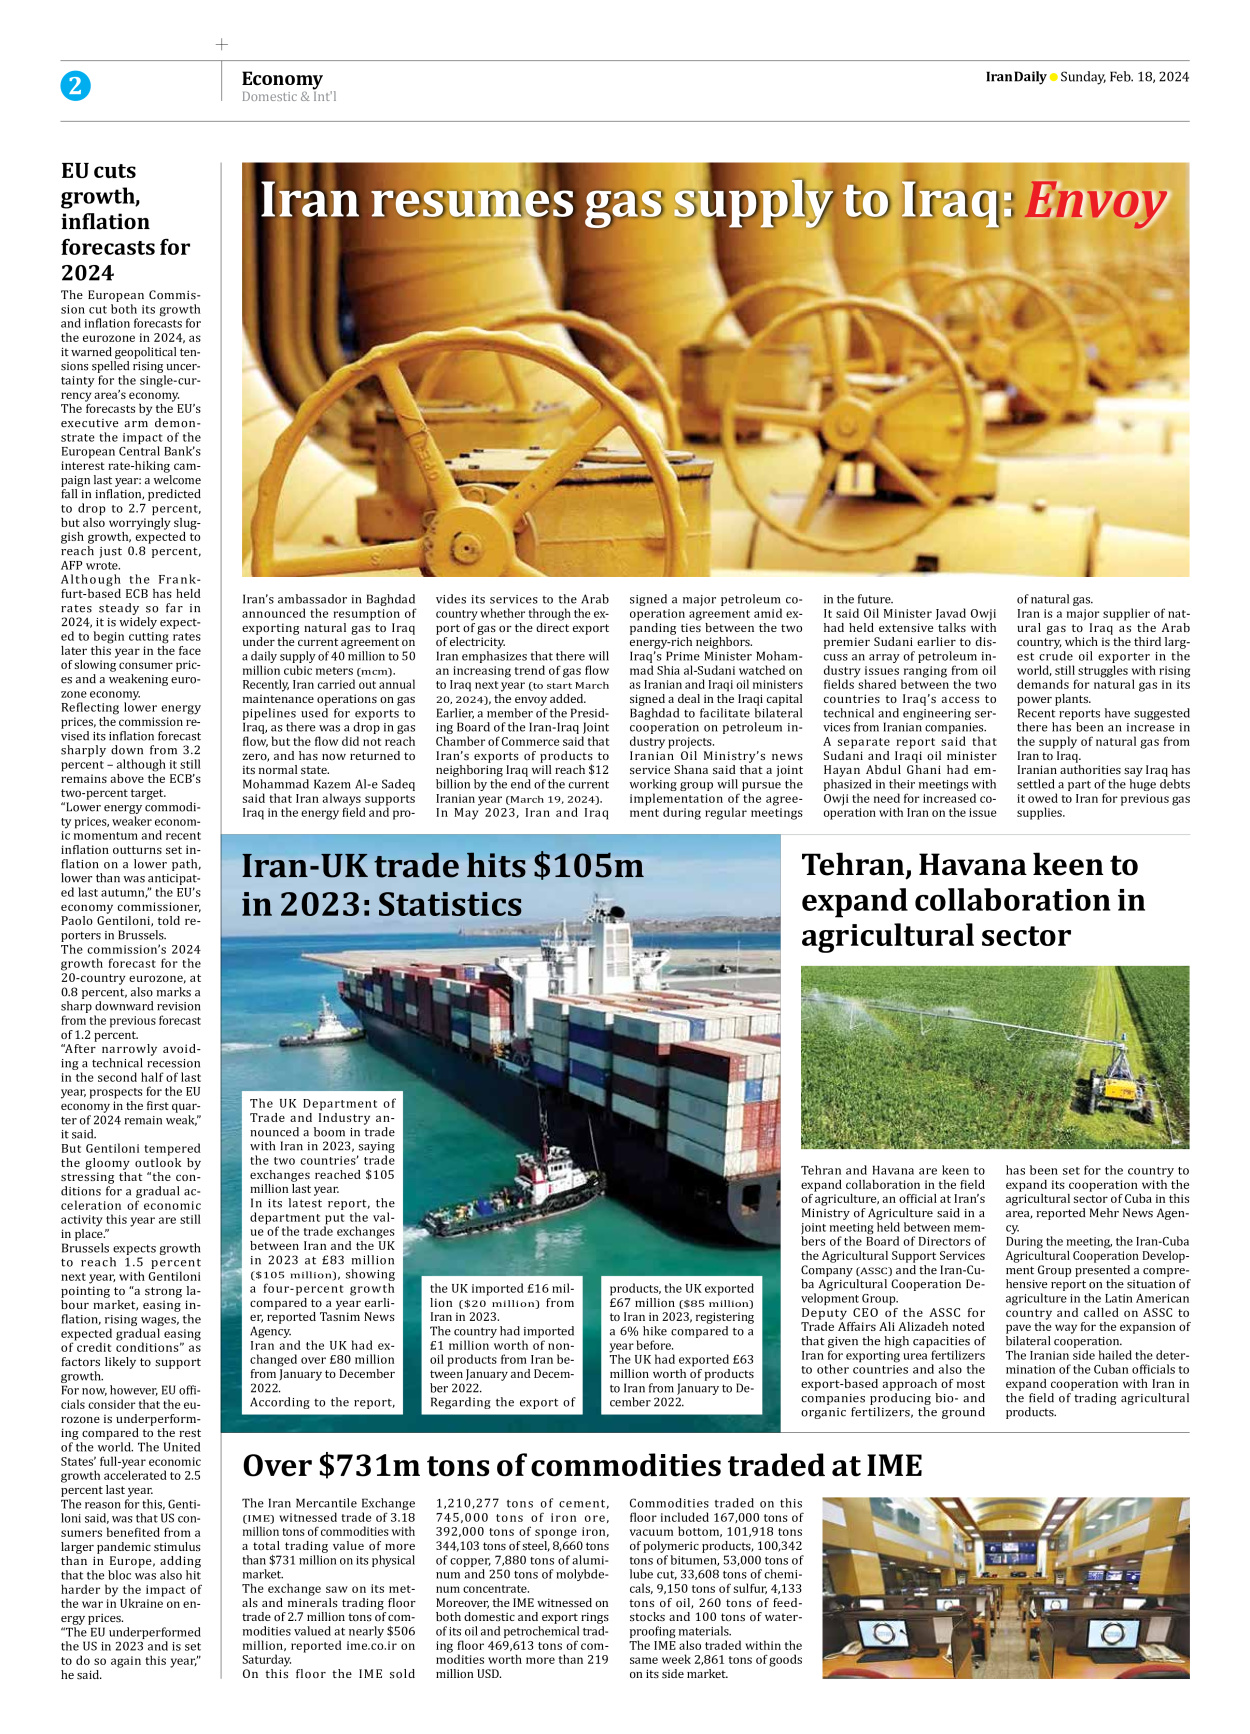 Iran Daily - Number Seven Thousand Five Hundred and Ten - 18 February 2024 - Page 2